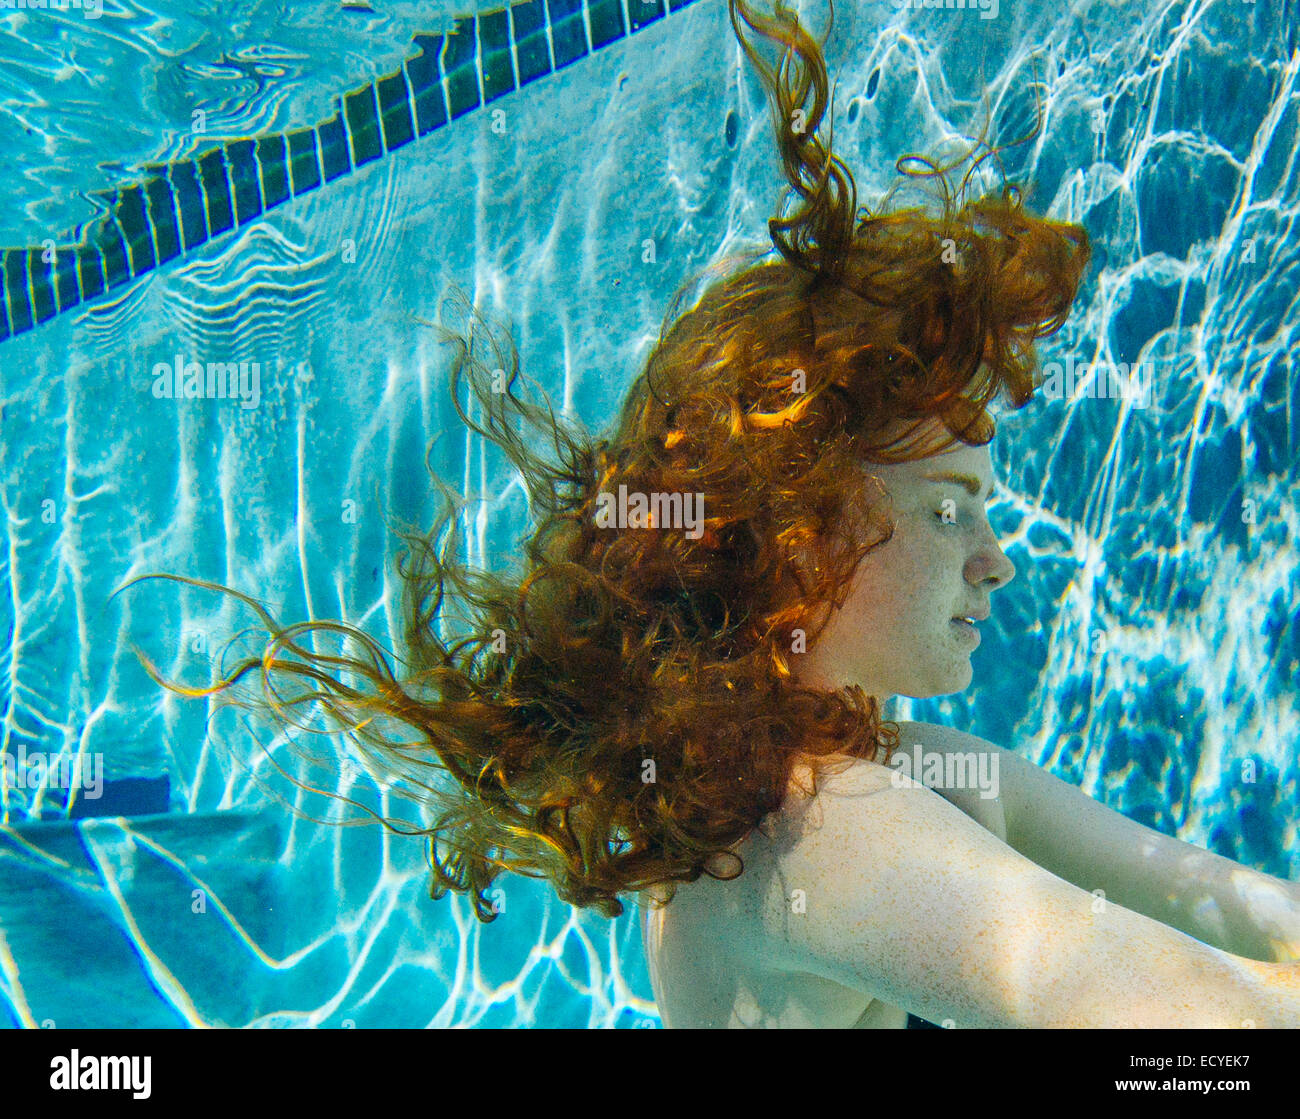 Teenage girl with red hair swimming underwater in pool Banque D'Images